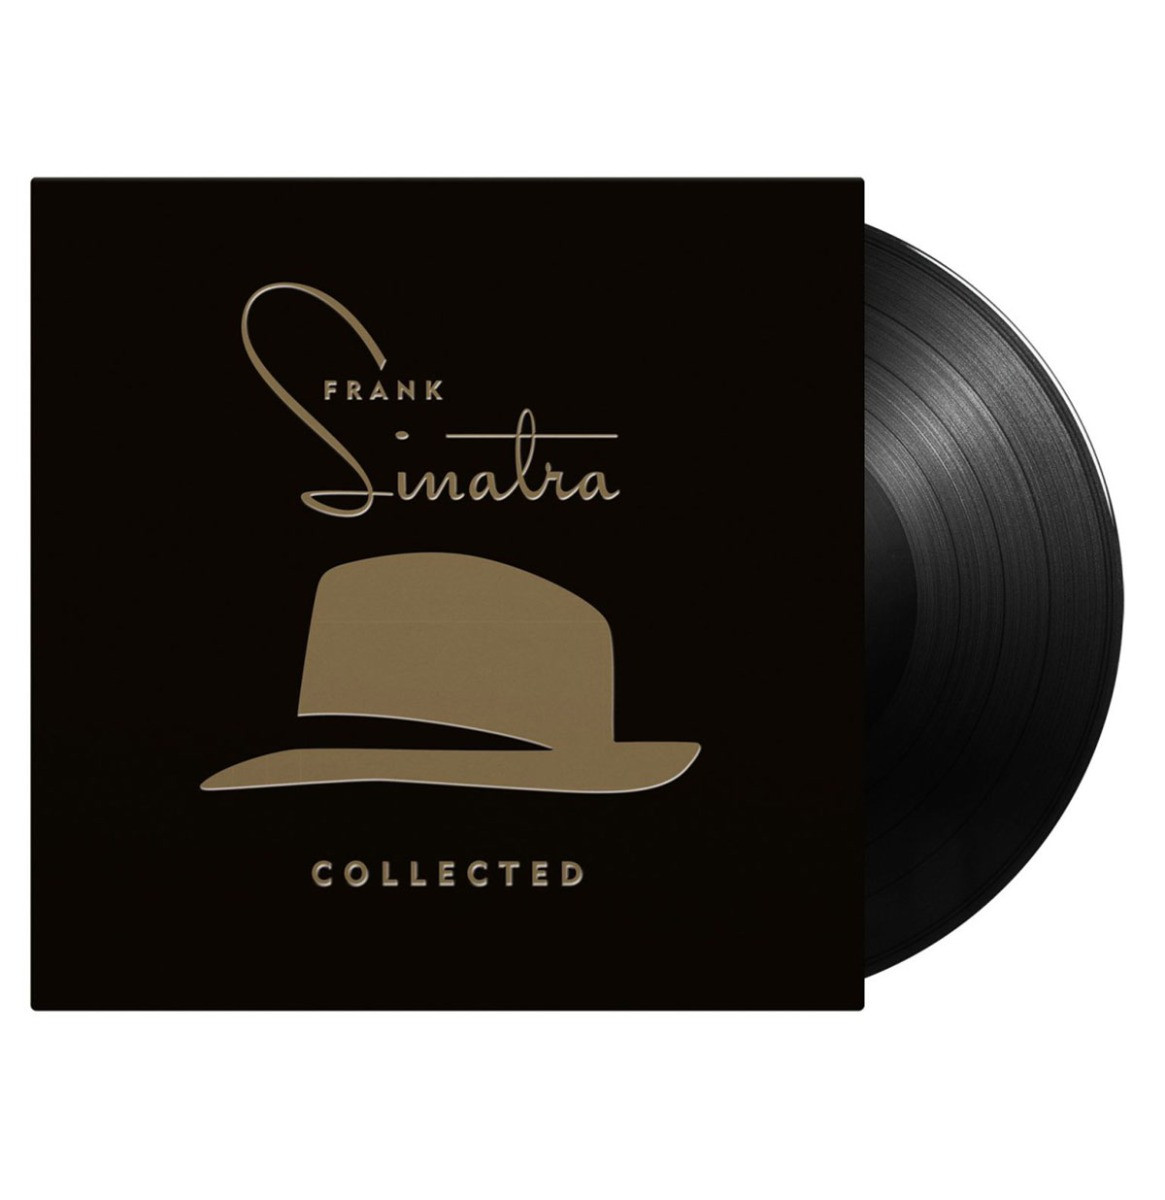 Frank Sinatra - Collected 2LP